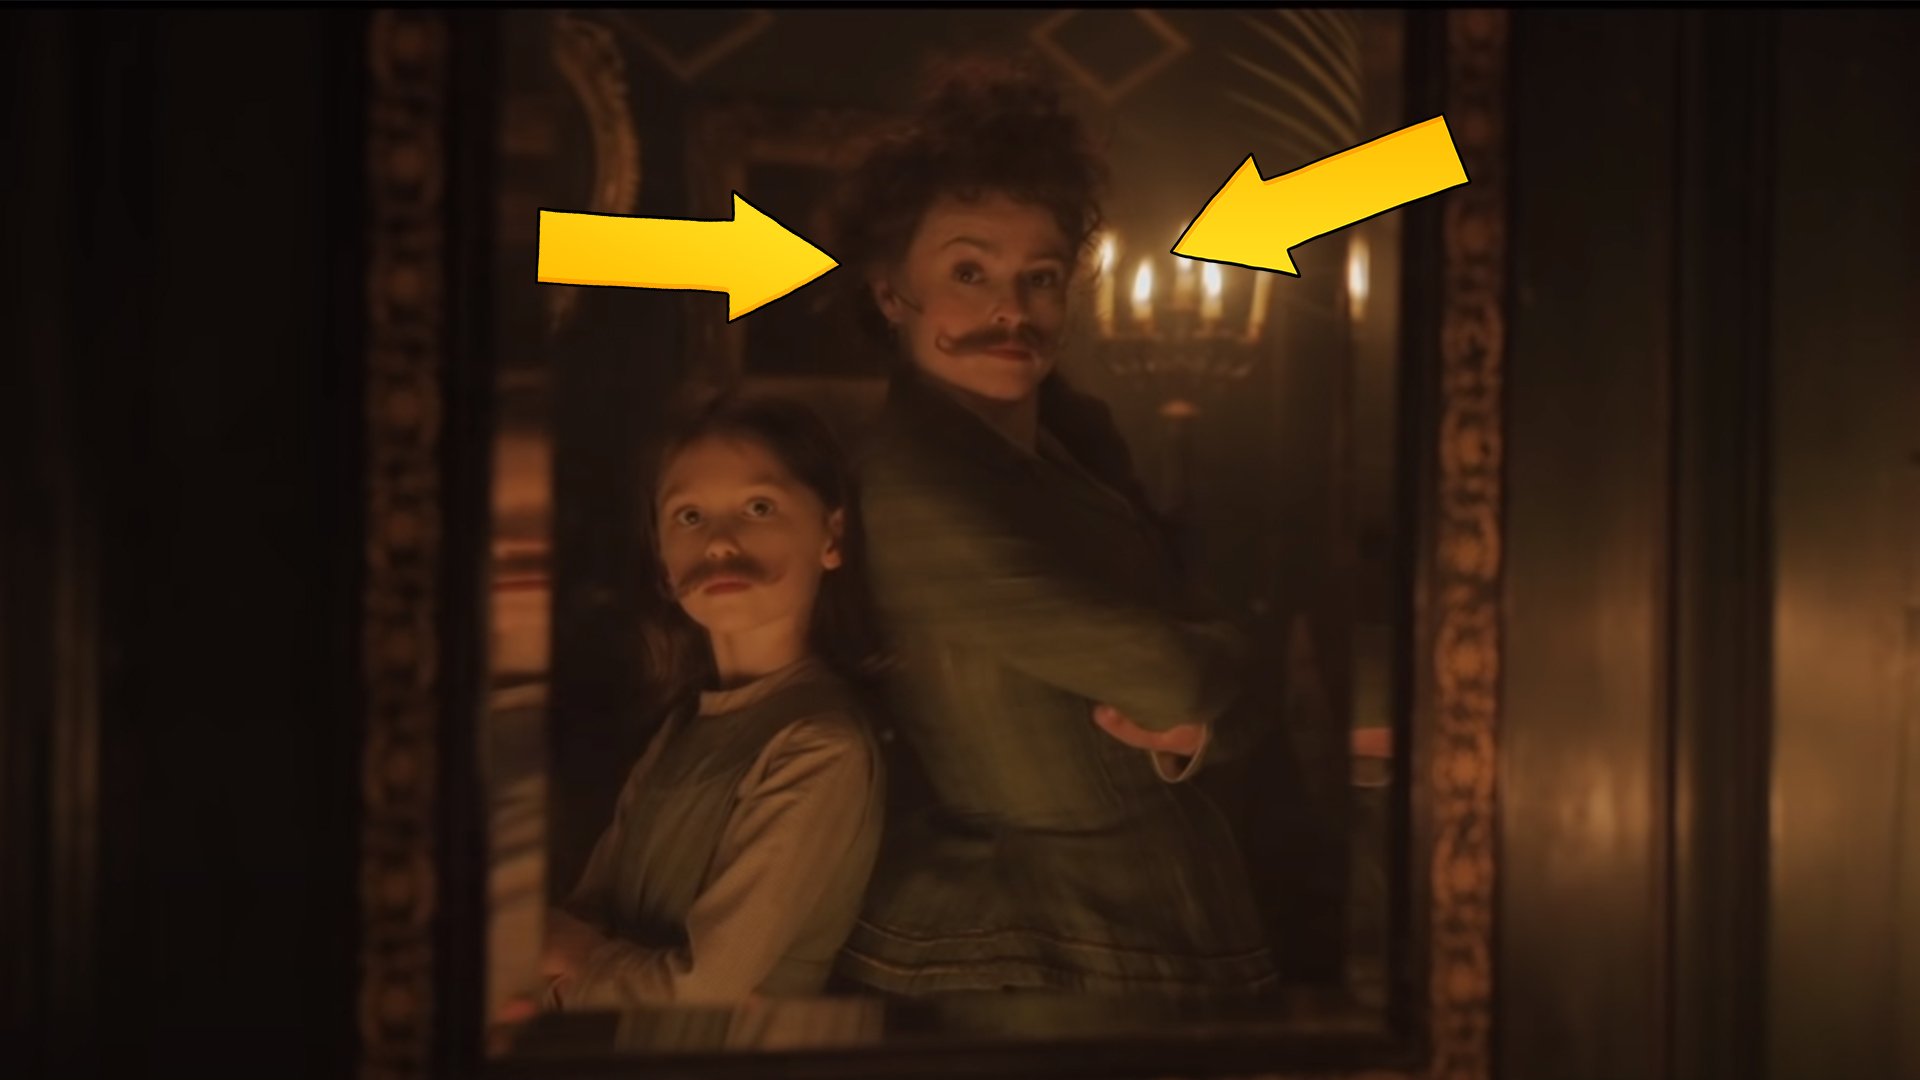 A scene from a film involving moustaches